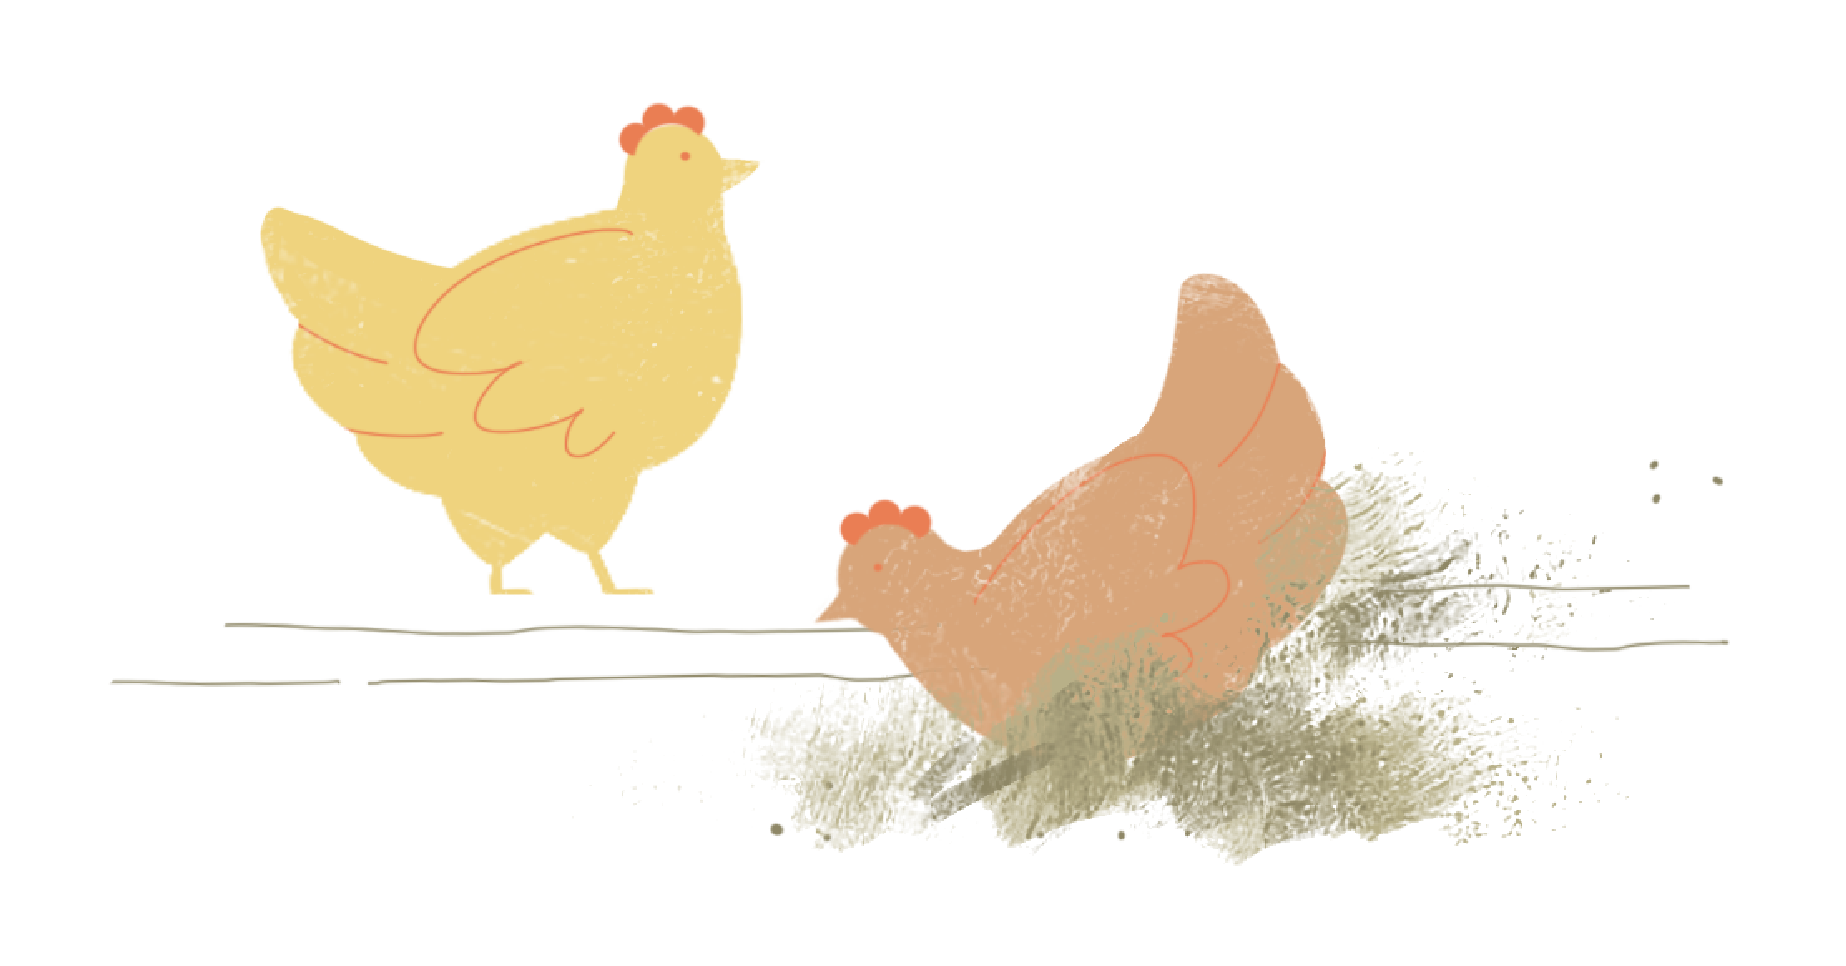 Chew's Agriculture - Chickens dig shallow ditches in soil or dirt